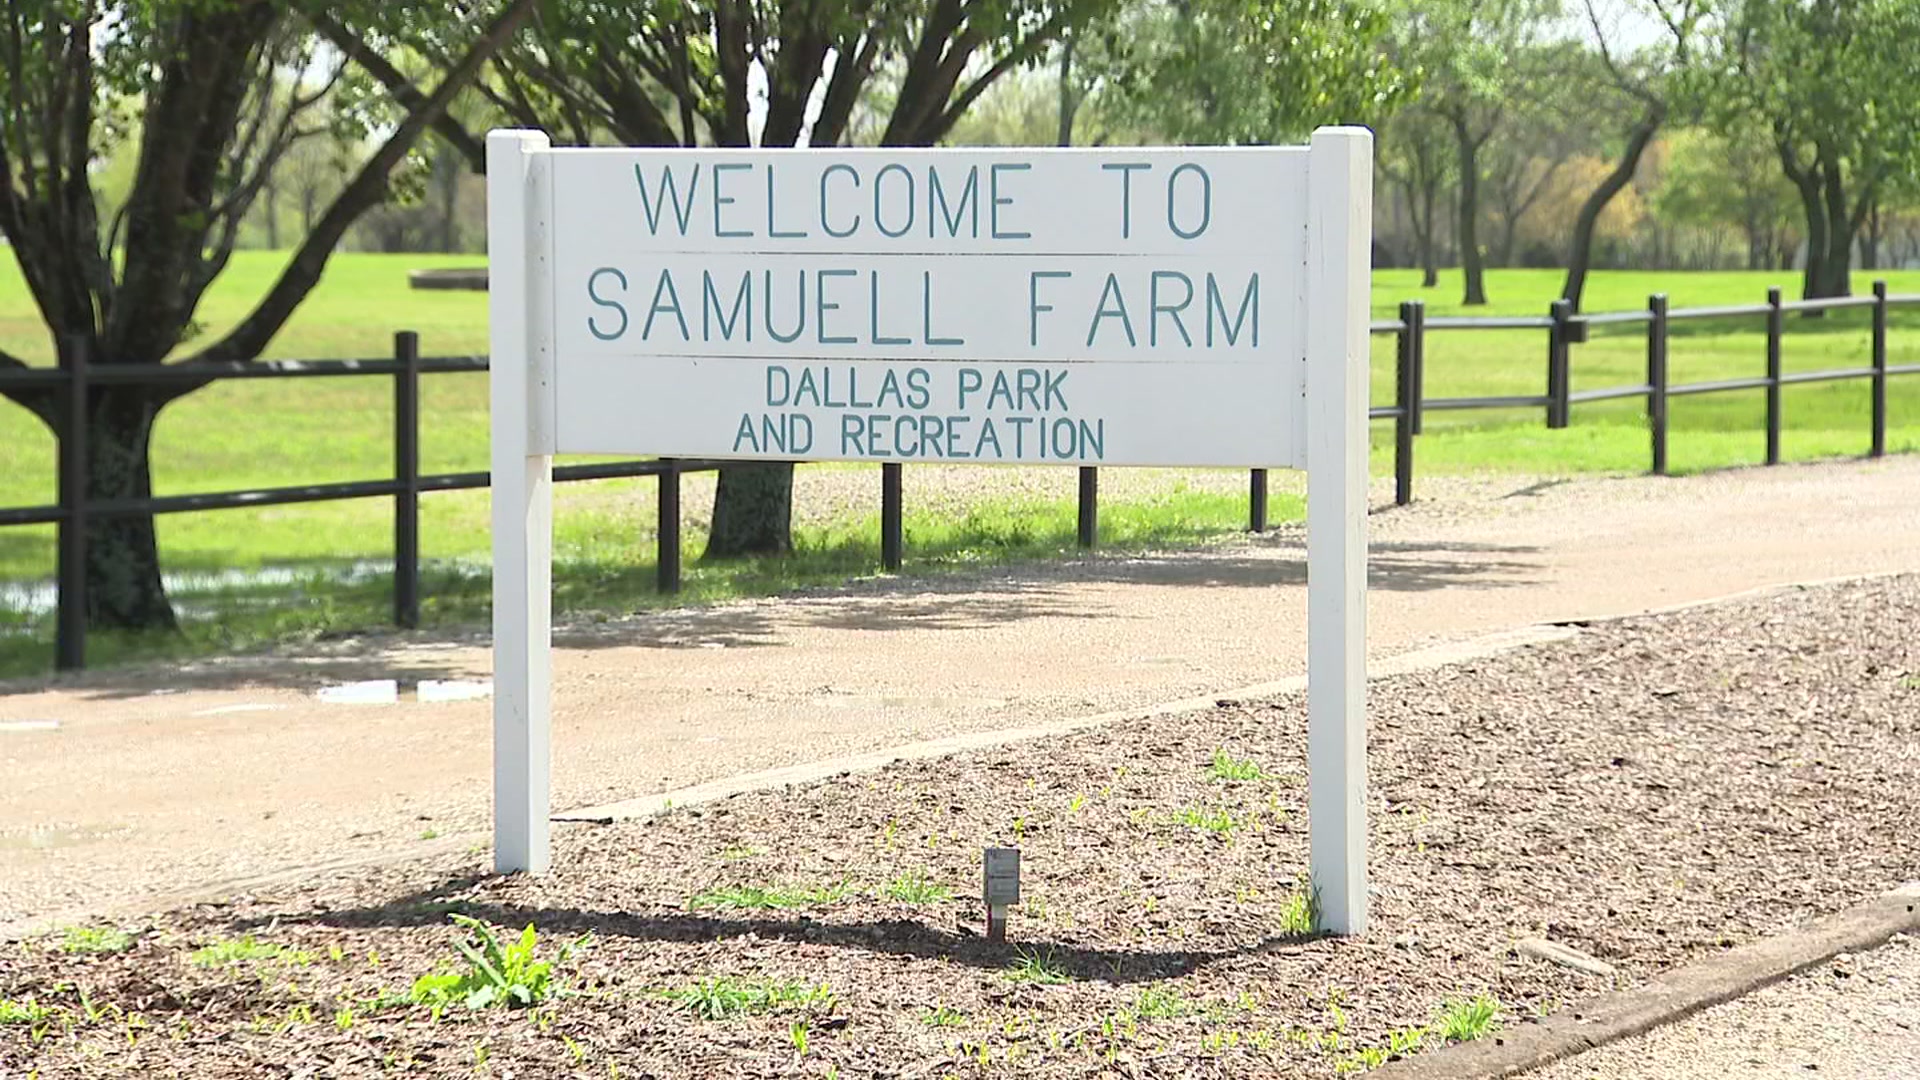 Dallas' Samuell Farm Park welcoming 2,000+ people for total solar
eclipse